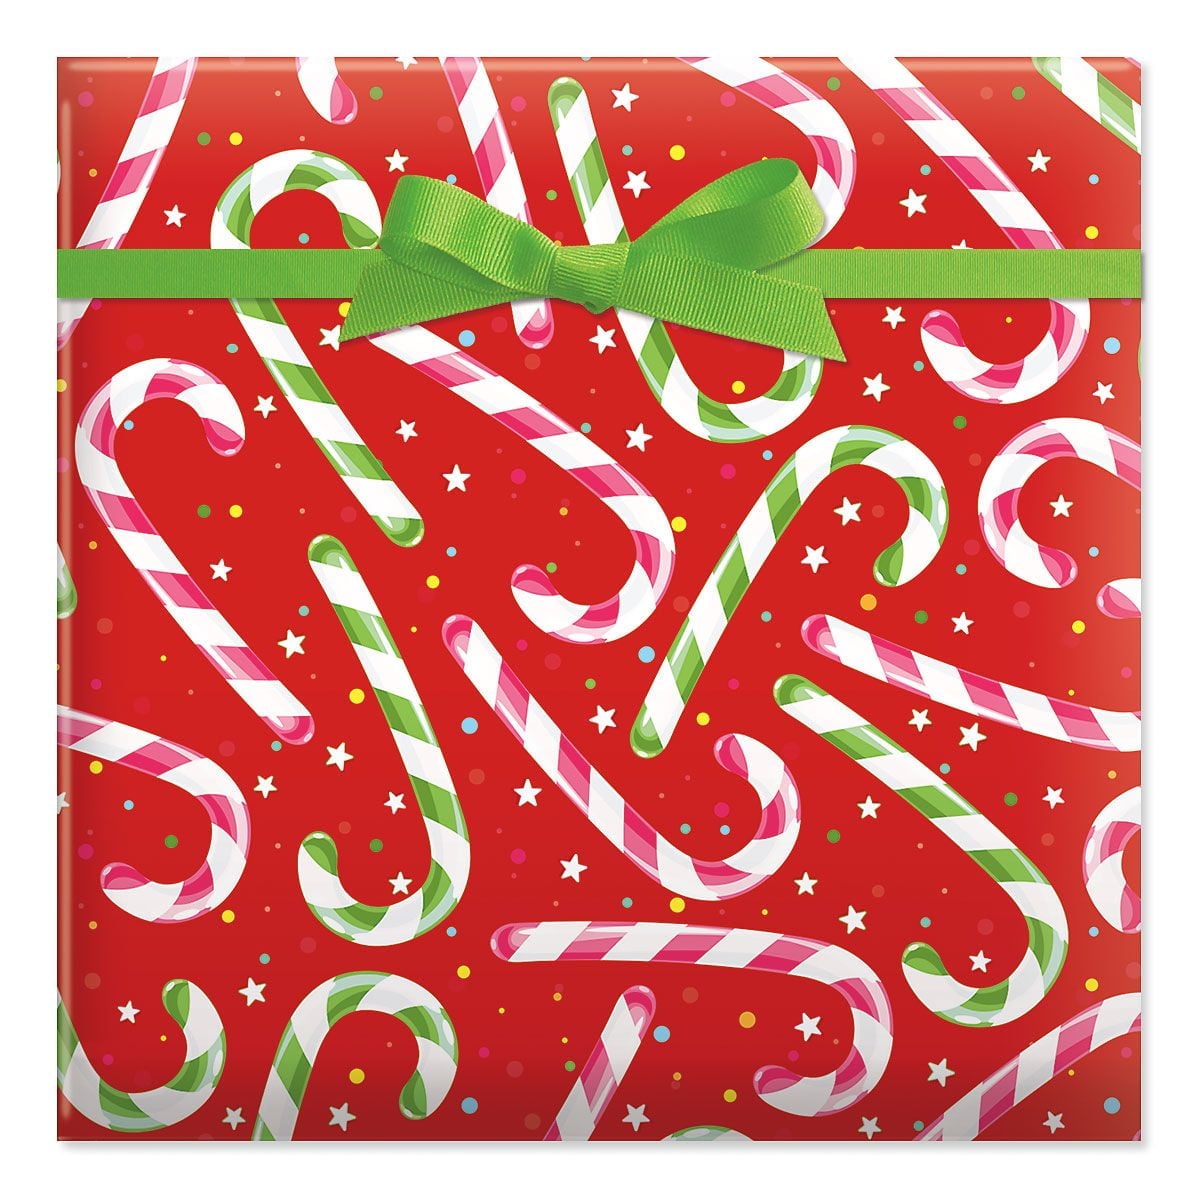 Current Snow Days Jumbo Rolled Gift Wrap - 1 Giant Roll, 23 Inches Wide by  32 feet Long, Heavyweight, Tear-Resistant, Holiday Wrapping Paper